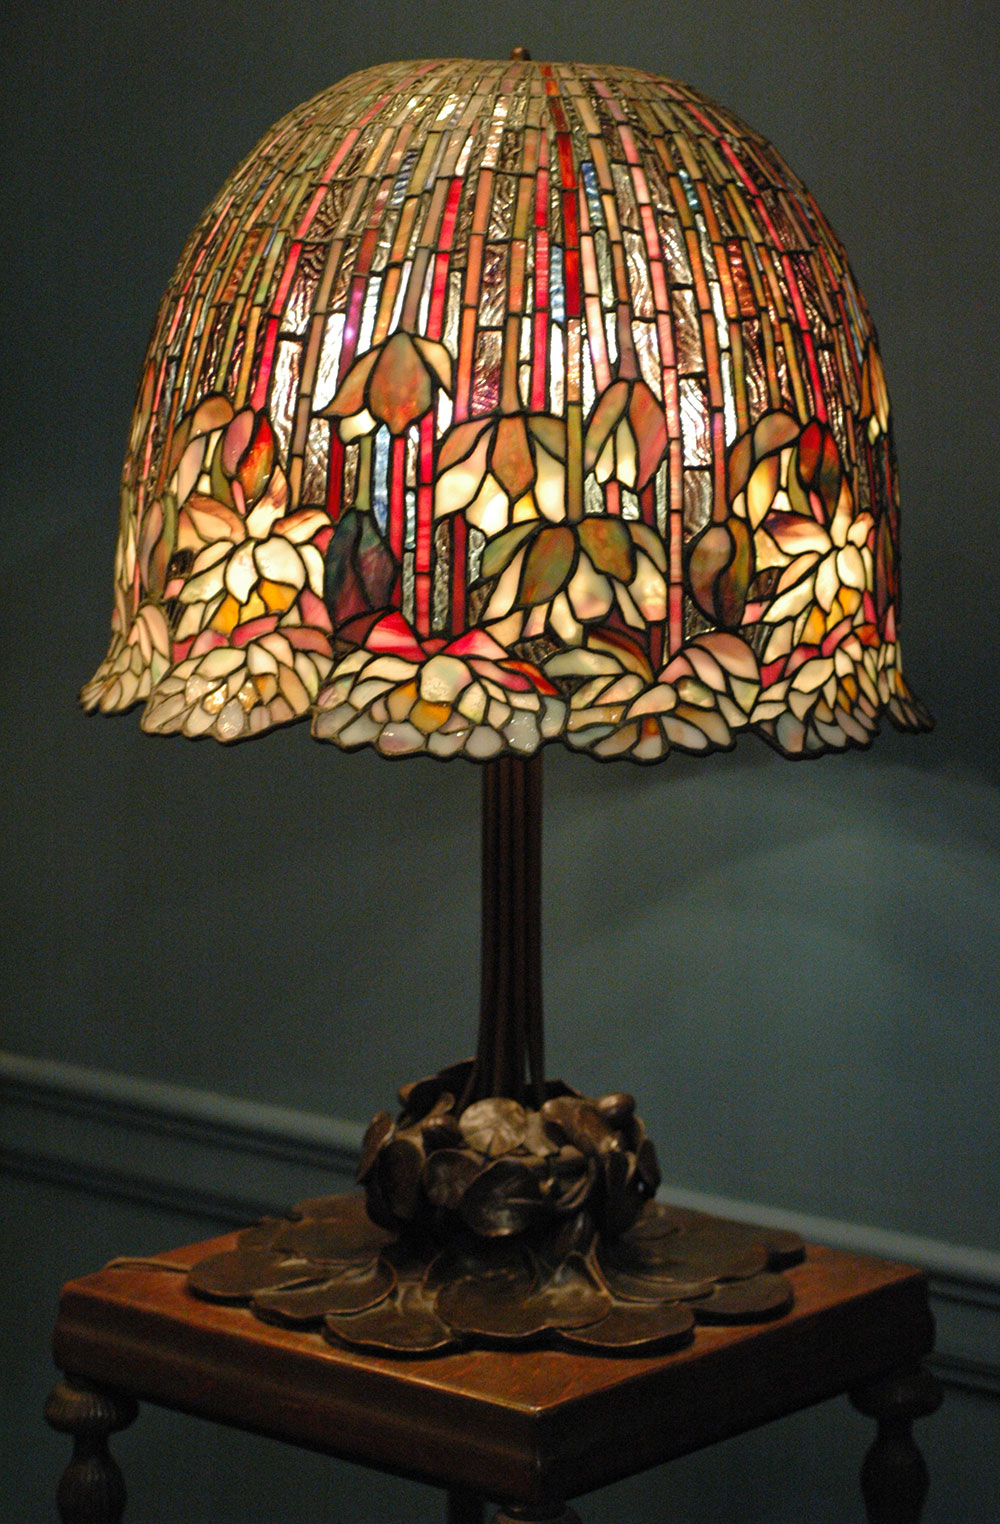 A Louis Comfort Tiffany Lamp with flower pattern design.